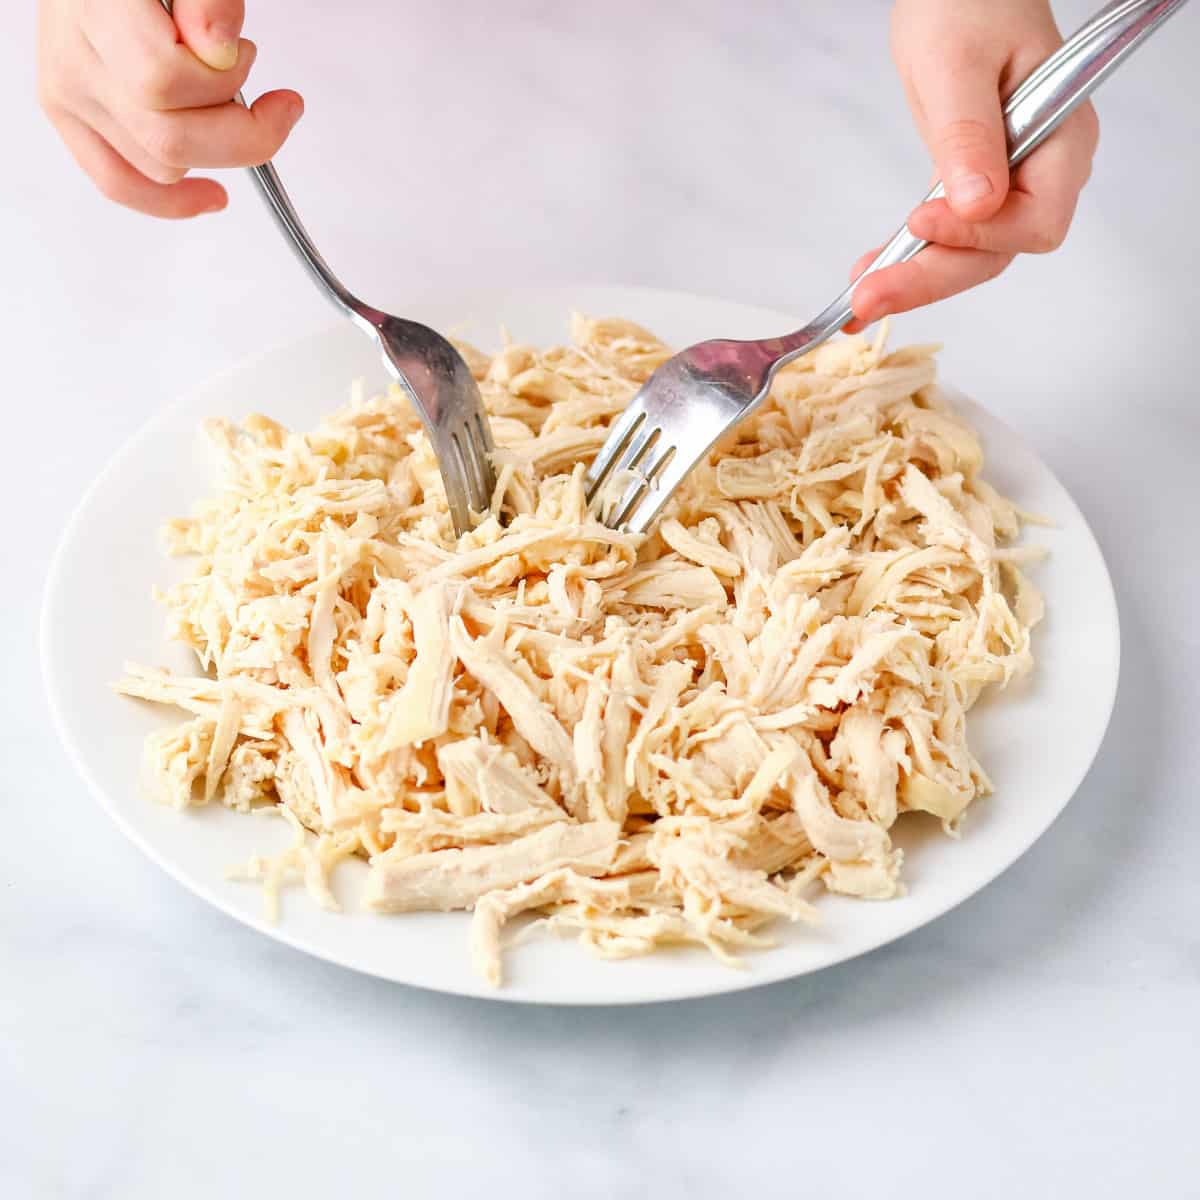 Shredding chicken with 2 silver forks on a white plate.